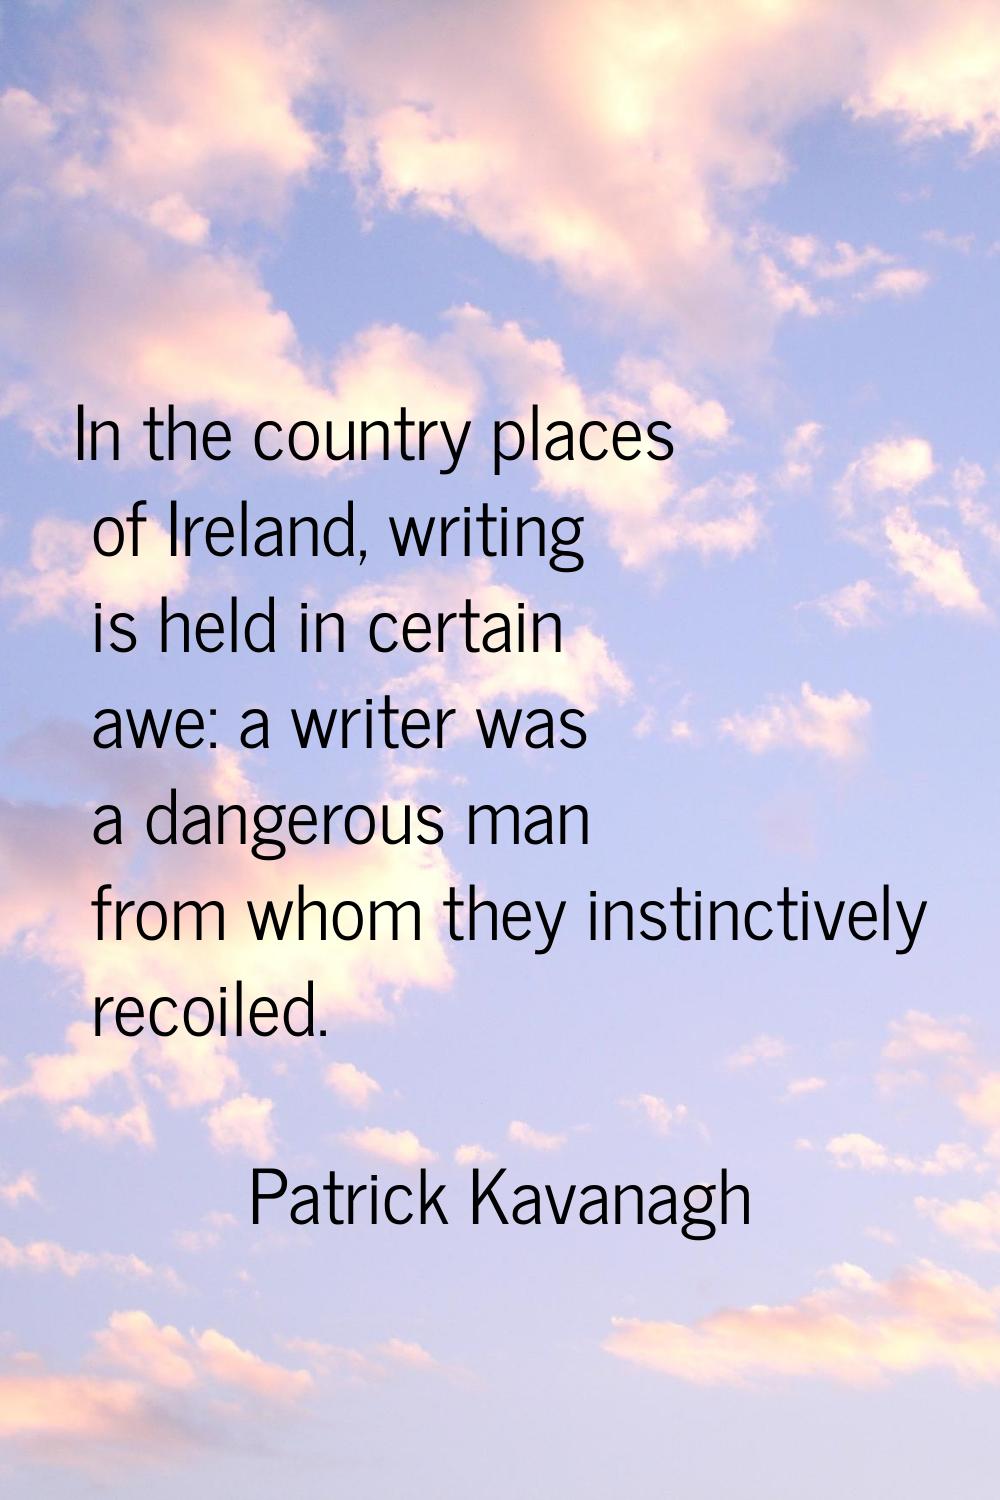 In the country places of Ireland, writing is held in certain awe: a writer was a dangerous man from